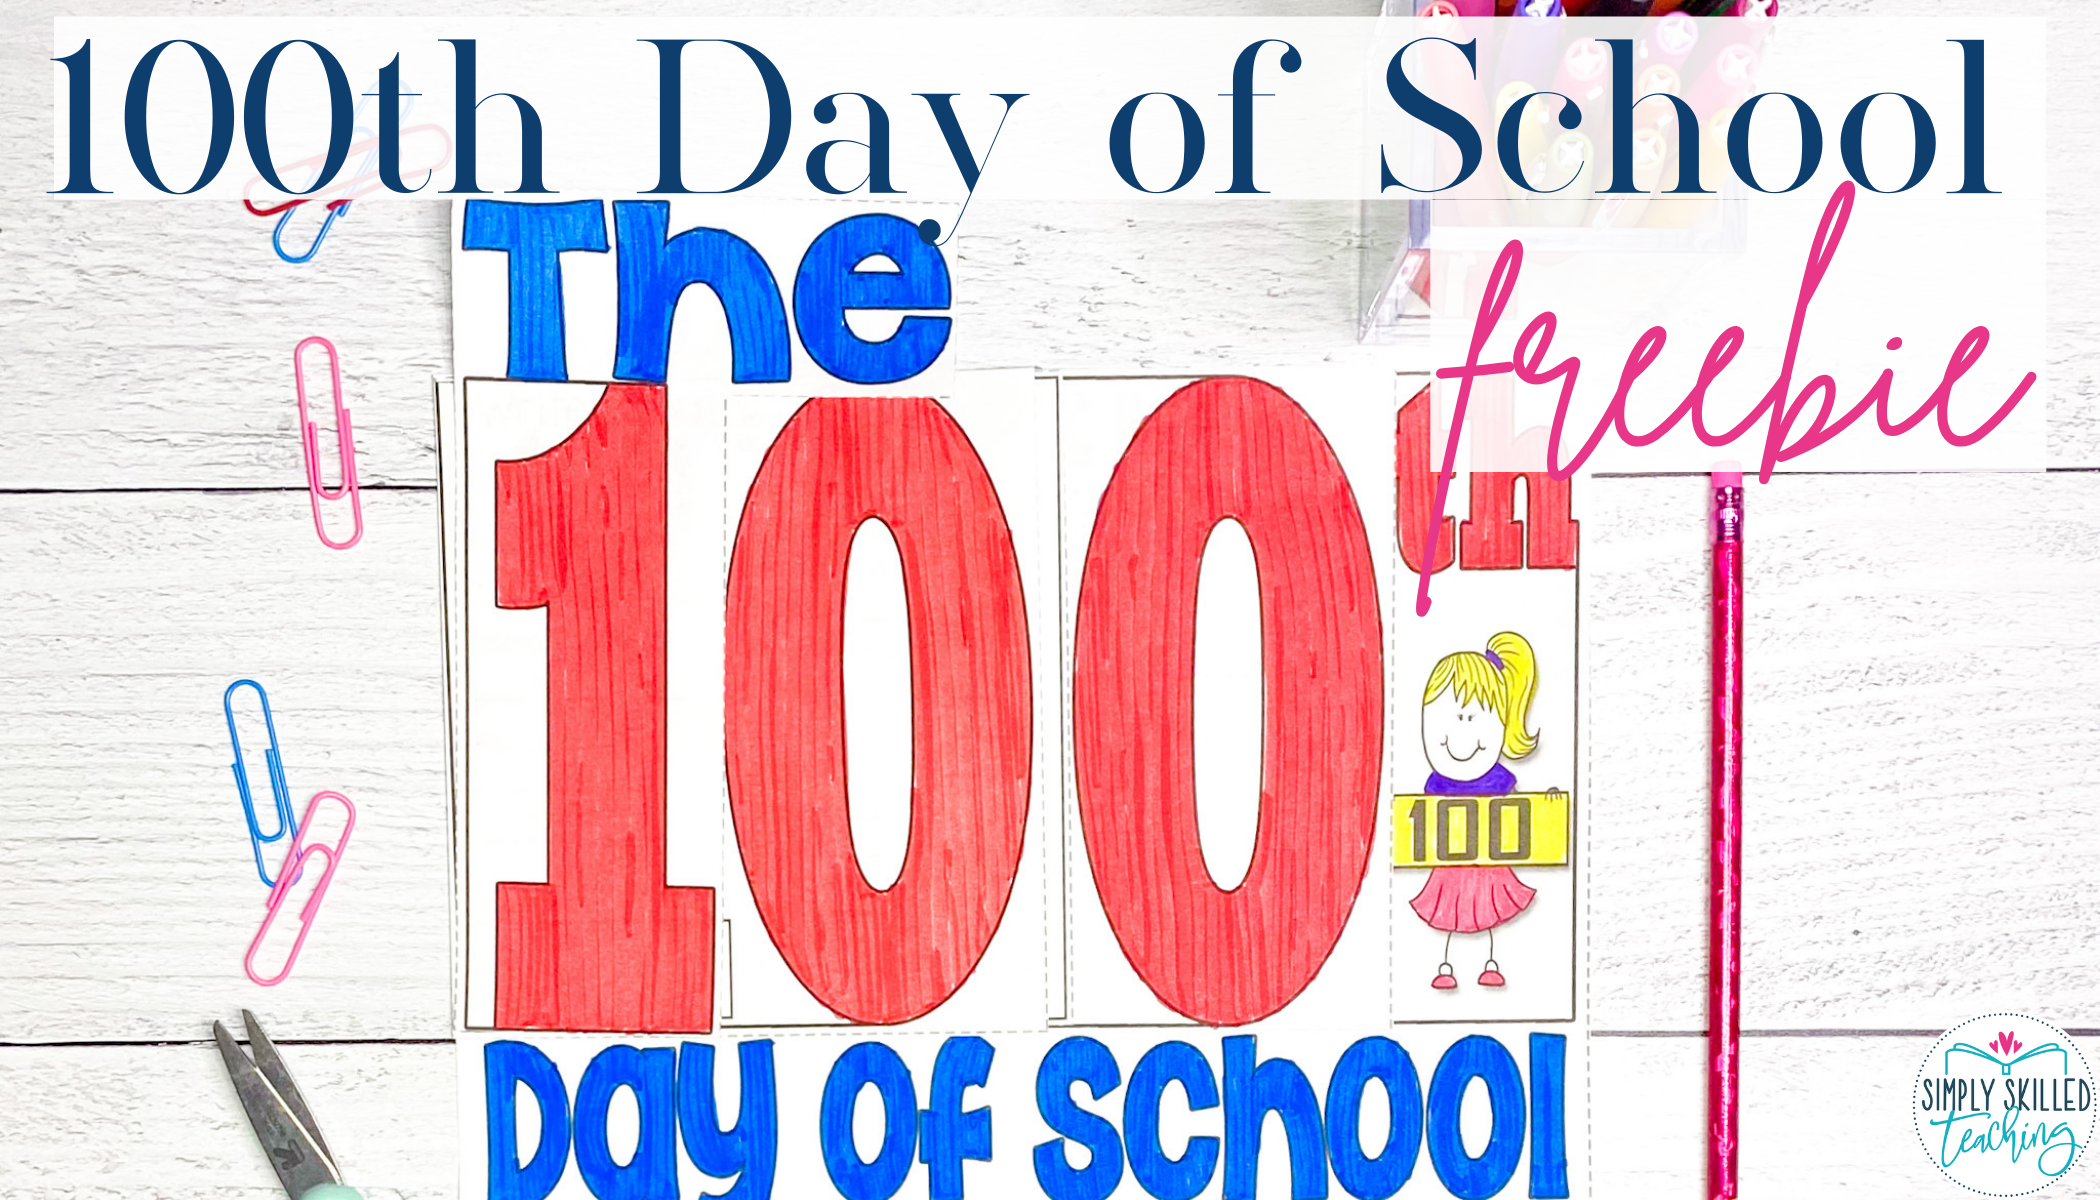 hundreth-day-of-school-featured-image